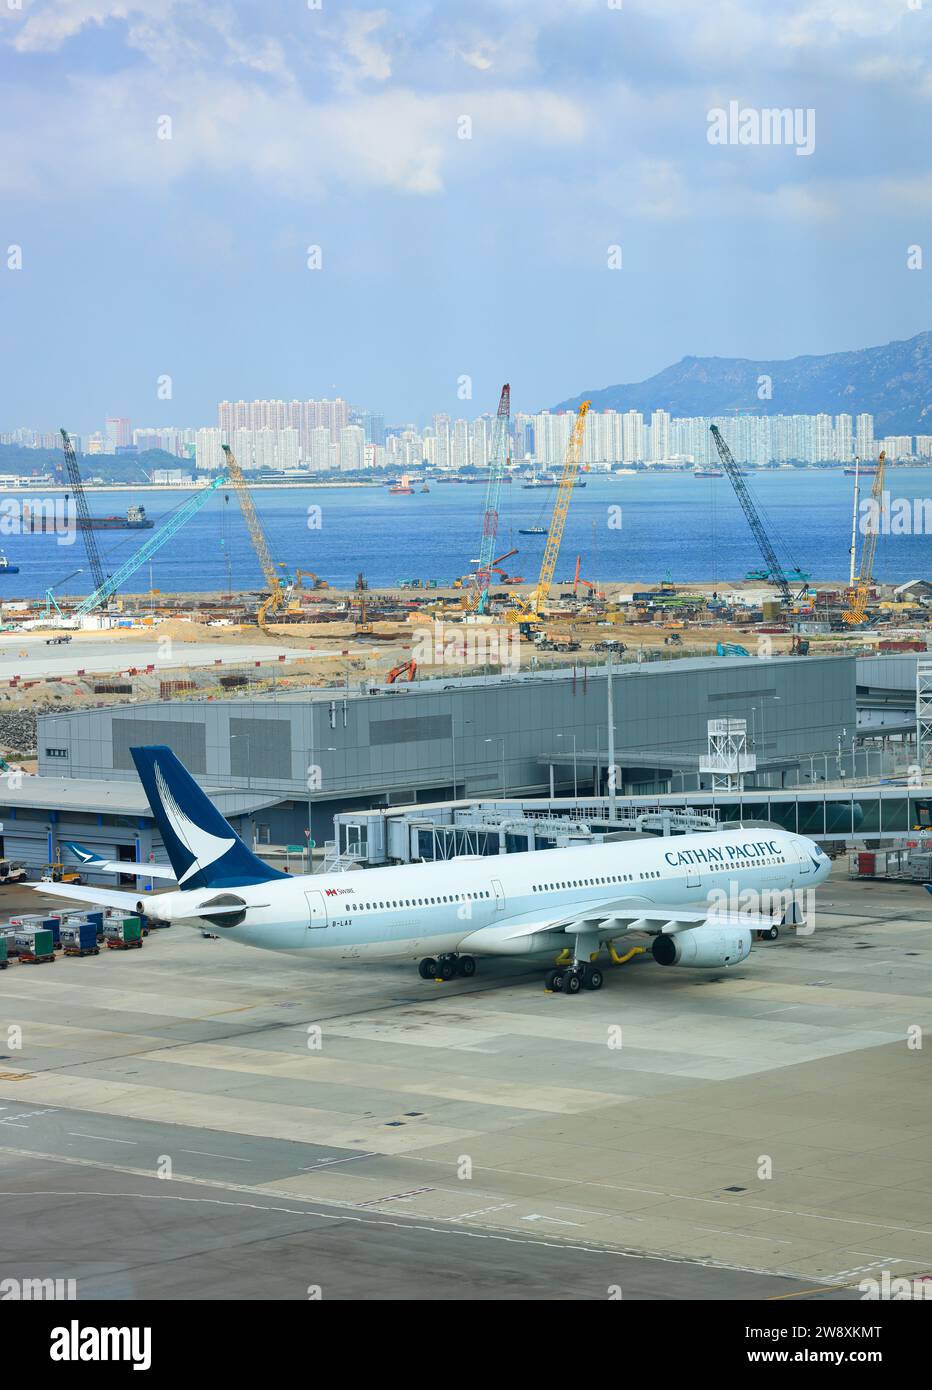 Cathay Pacific Airlines fleet Airbus A330-300 operated at Hong Kong International Airport. Stock Photo